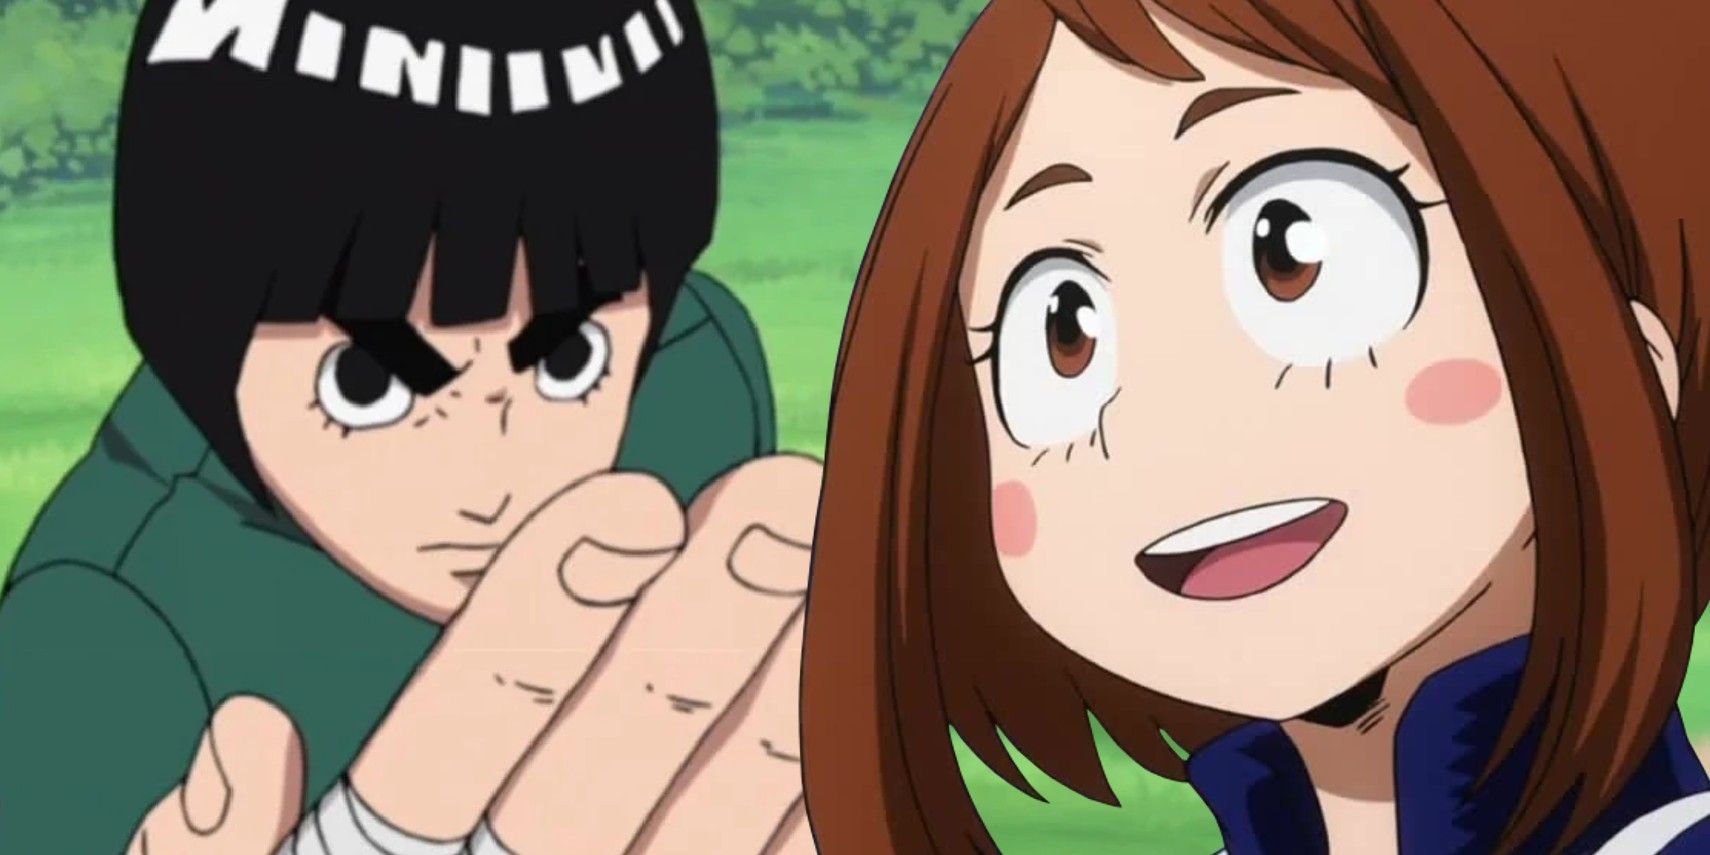 10 Times An Anime Underdog Got Completely Annihilated